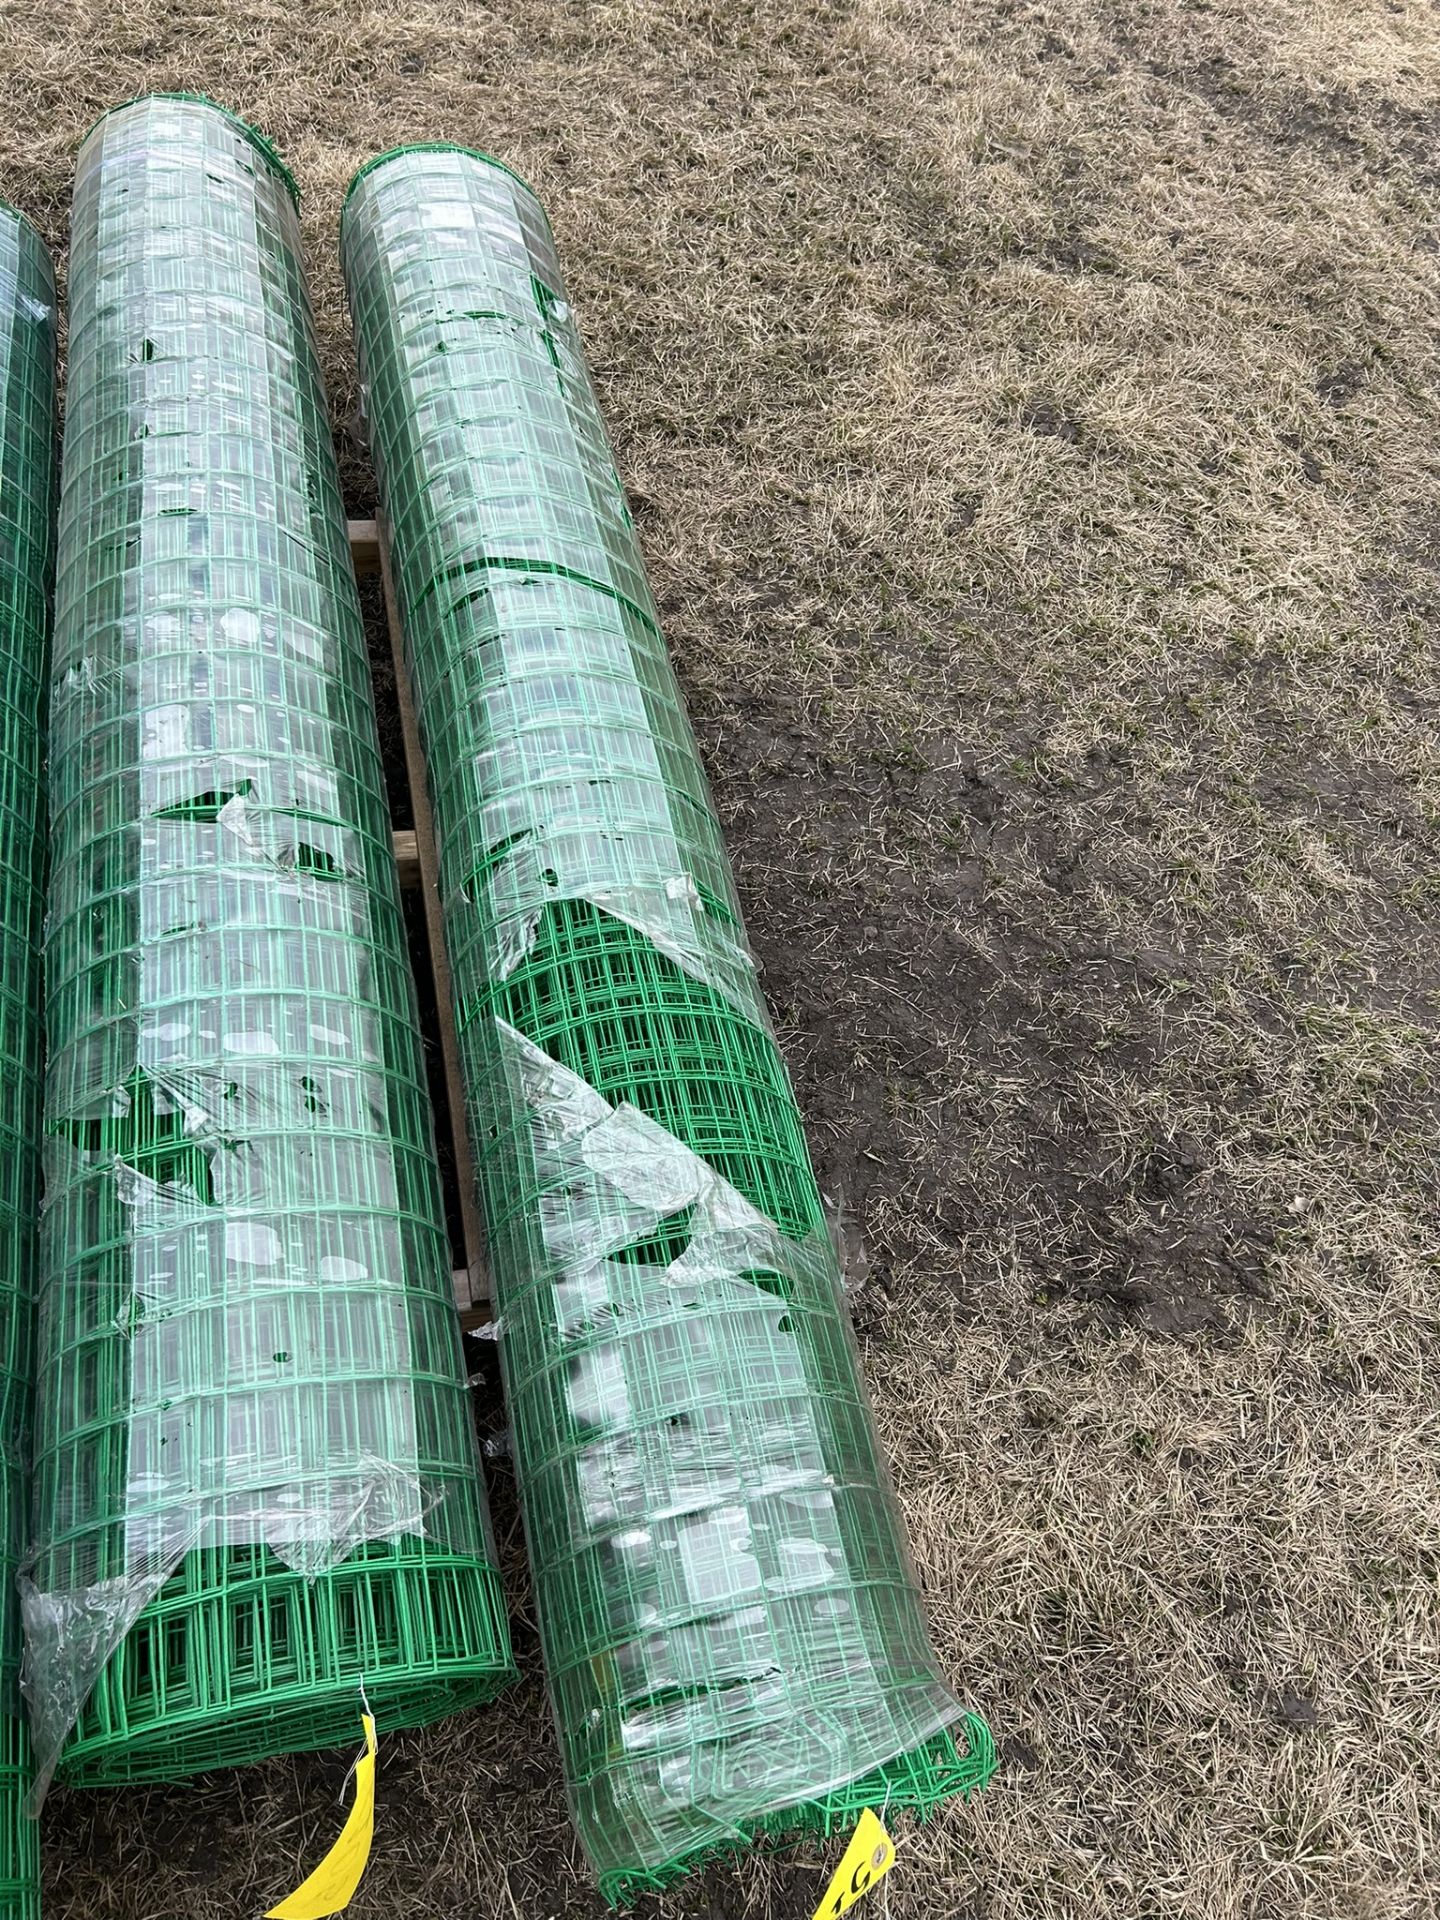 2-ROLLS OF 72" COATED WIRE MESH FENCING